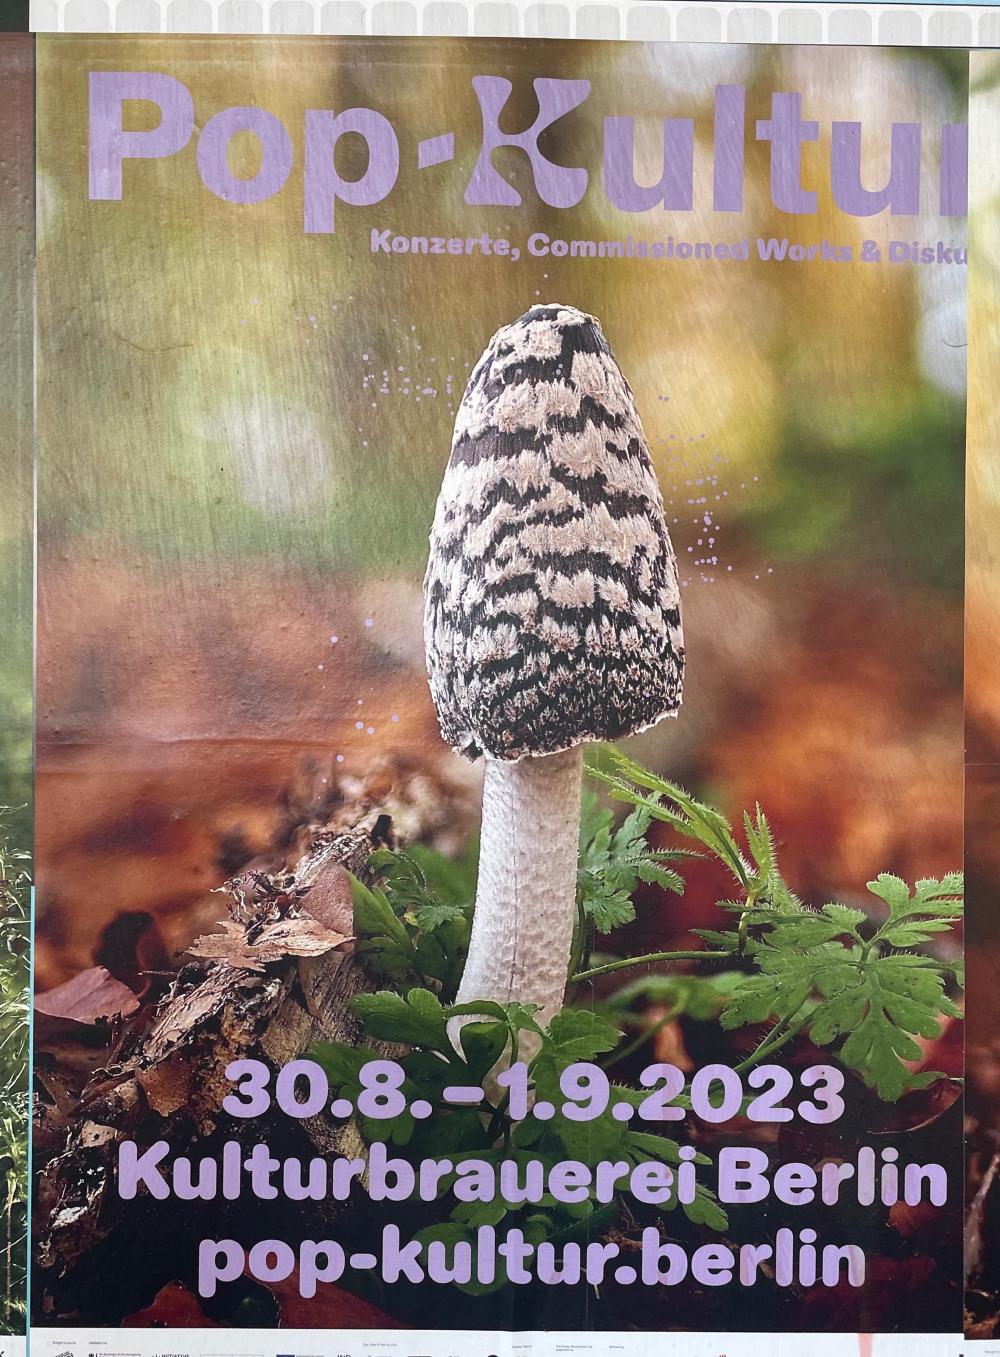 Poster for Pop Kultur at Kulturbrauerei, featuring photography of a mushroom